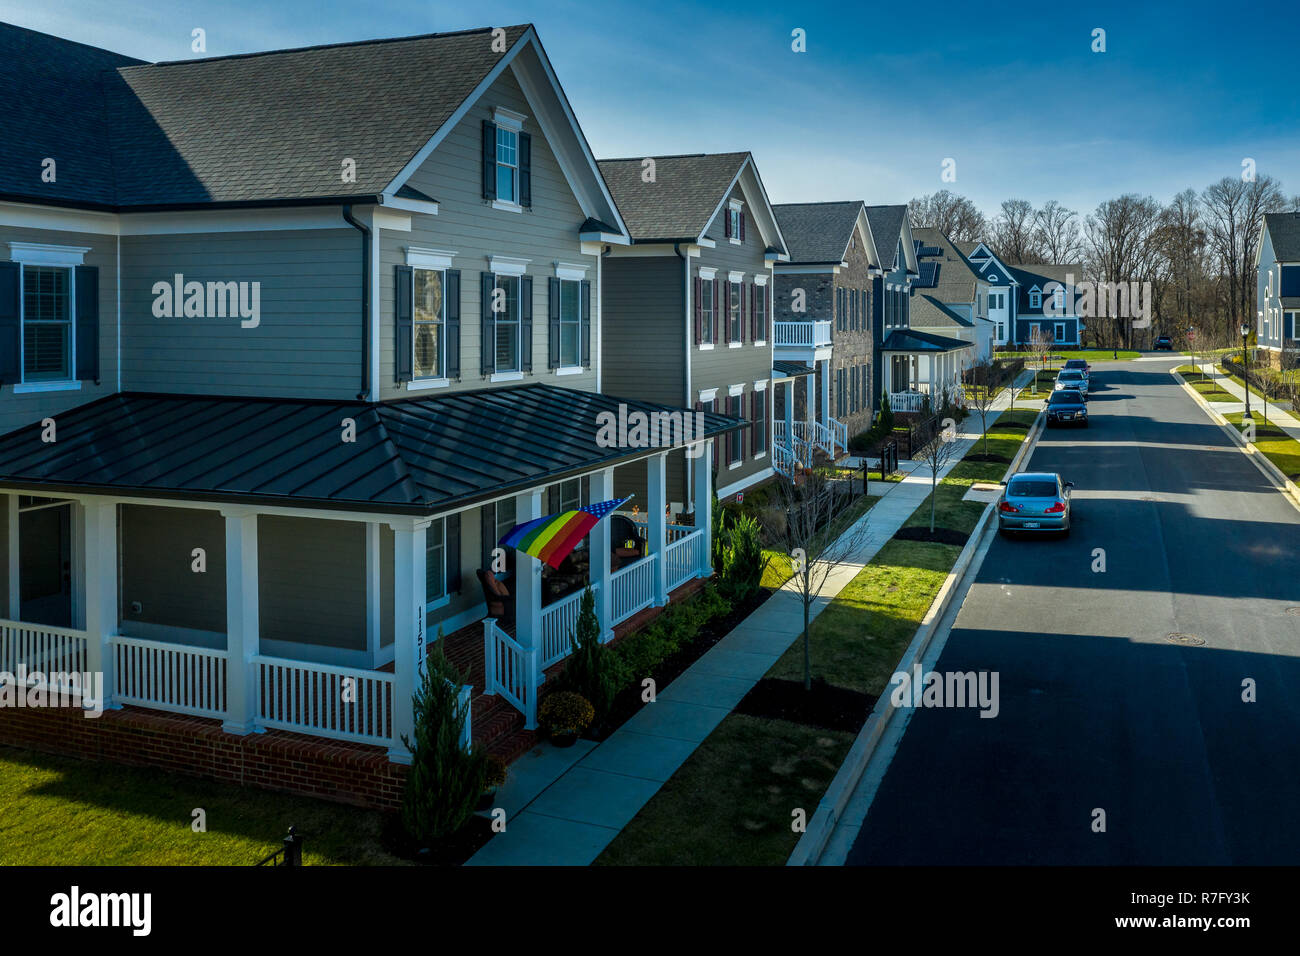 Aerial view of typical upper class American single family real estate homes with vinyl siding and brick facade in the East Coast of the United States Stock Photo